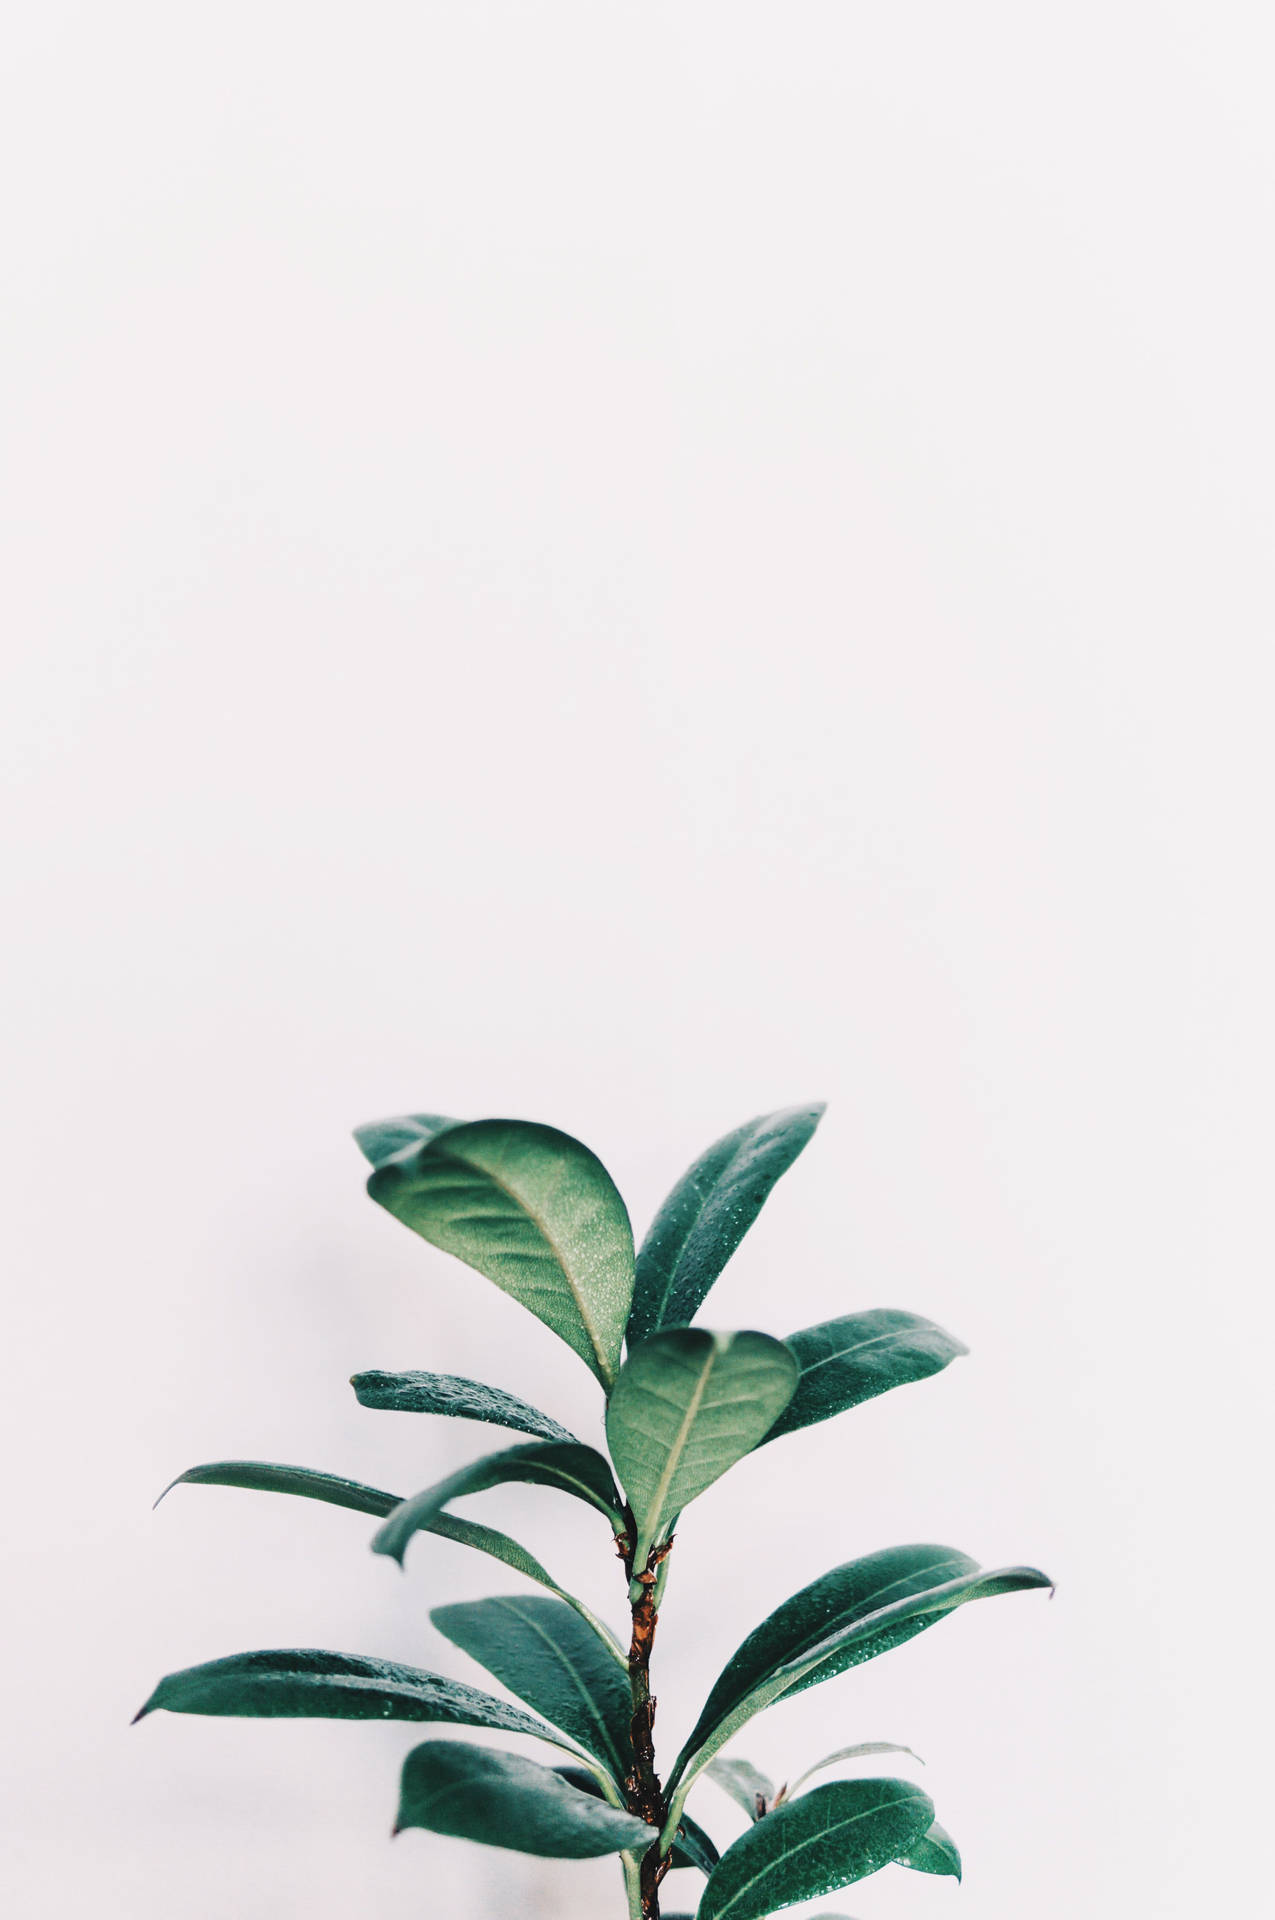 Tranquil White Aesthetic With Green Leaves For Iphone Wallpaper Background